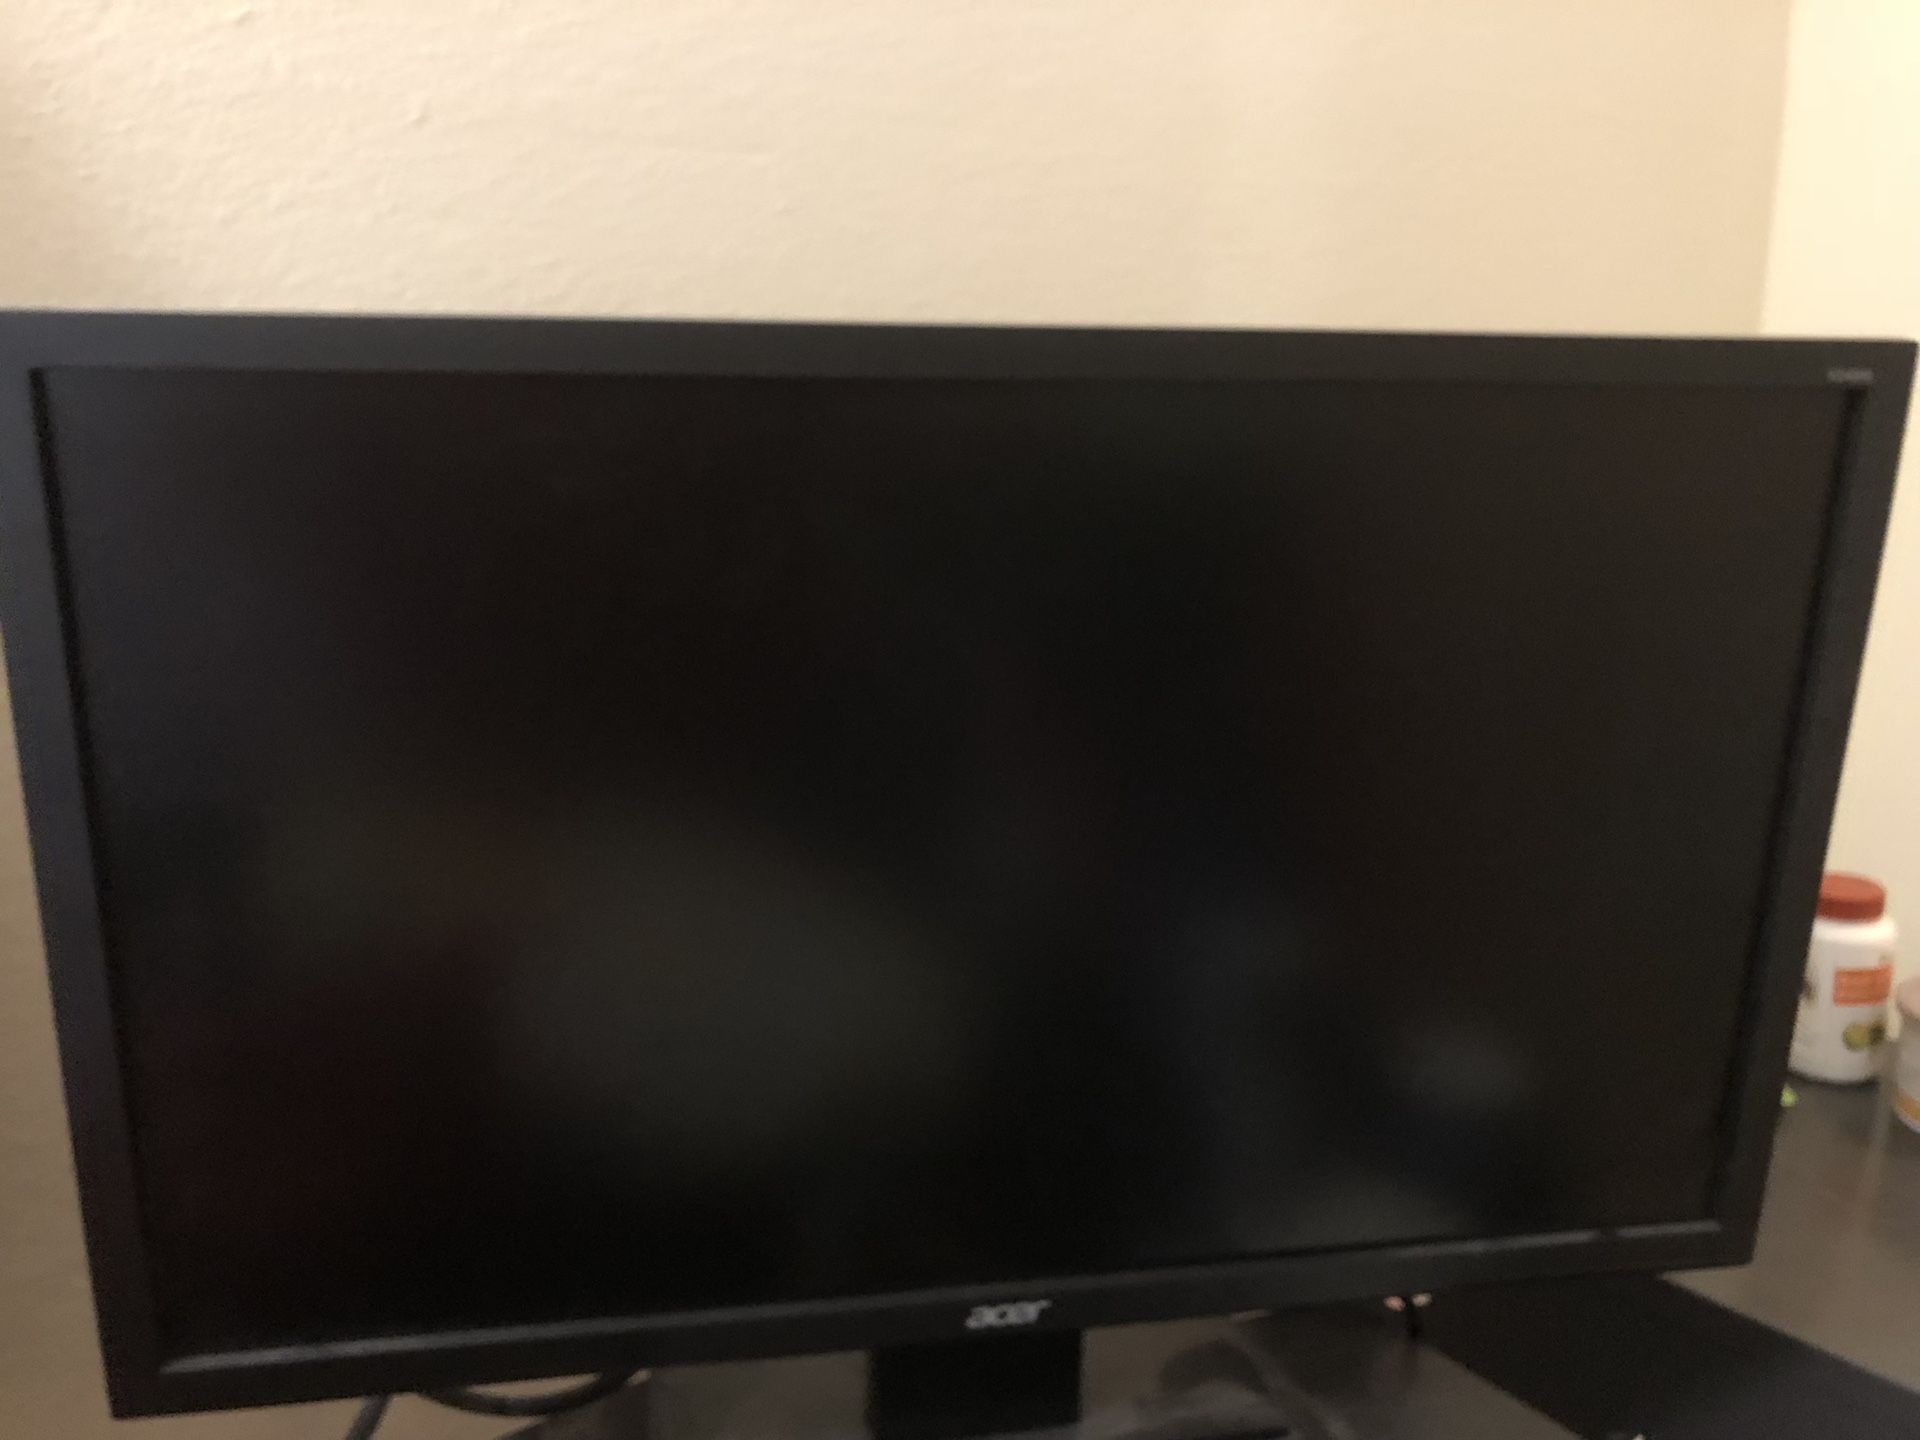 Almost new Acer V246Hl monitor with computer cable.